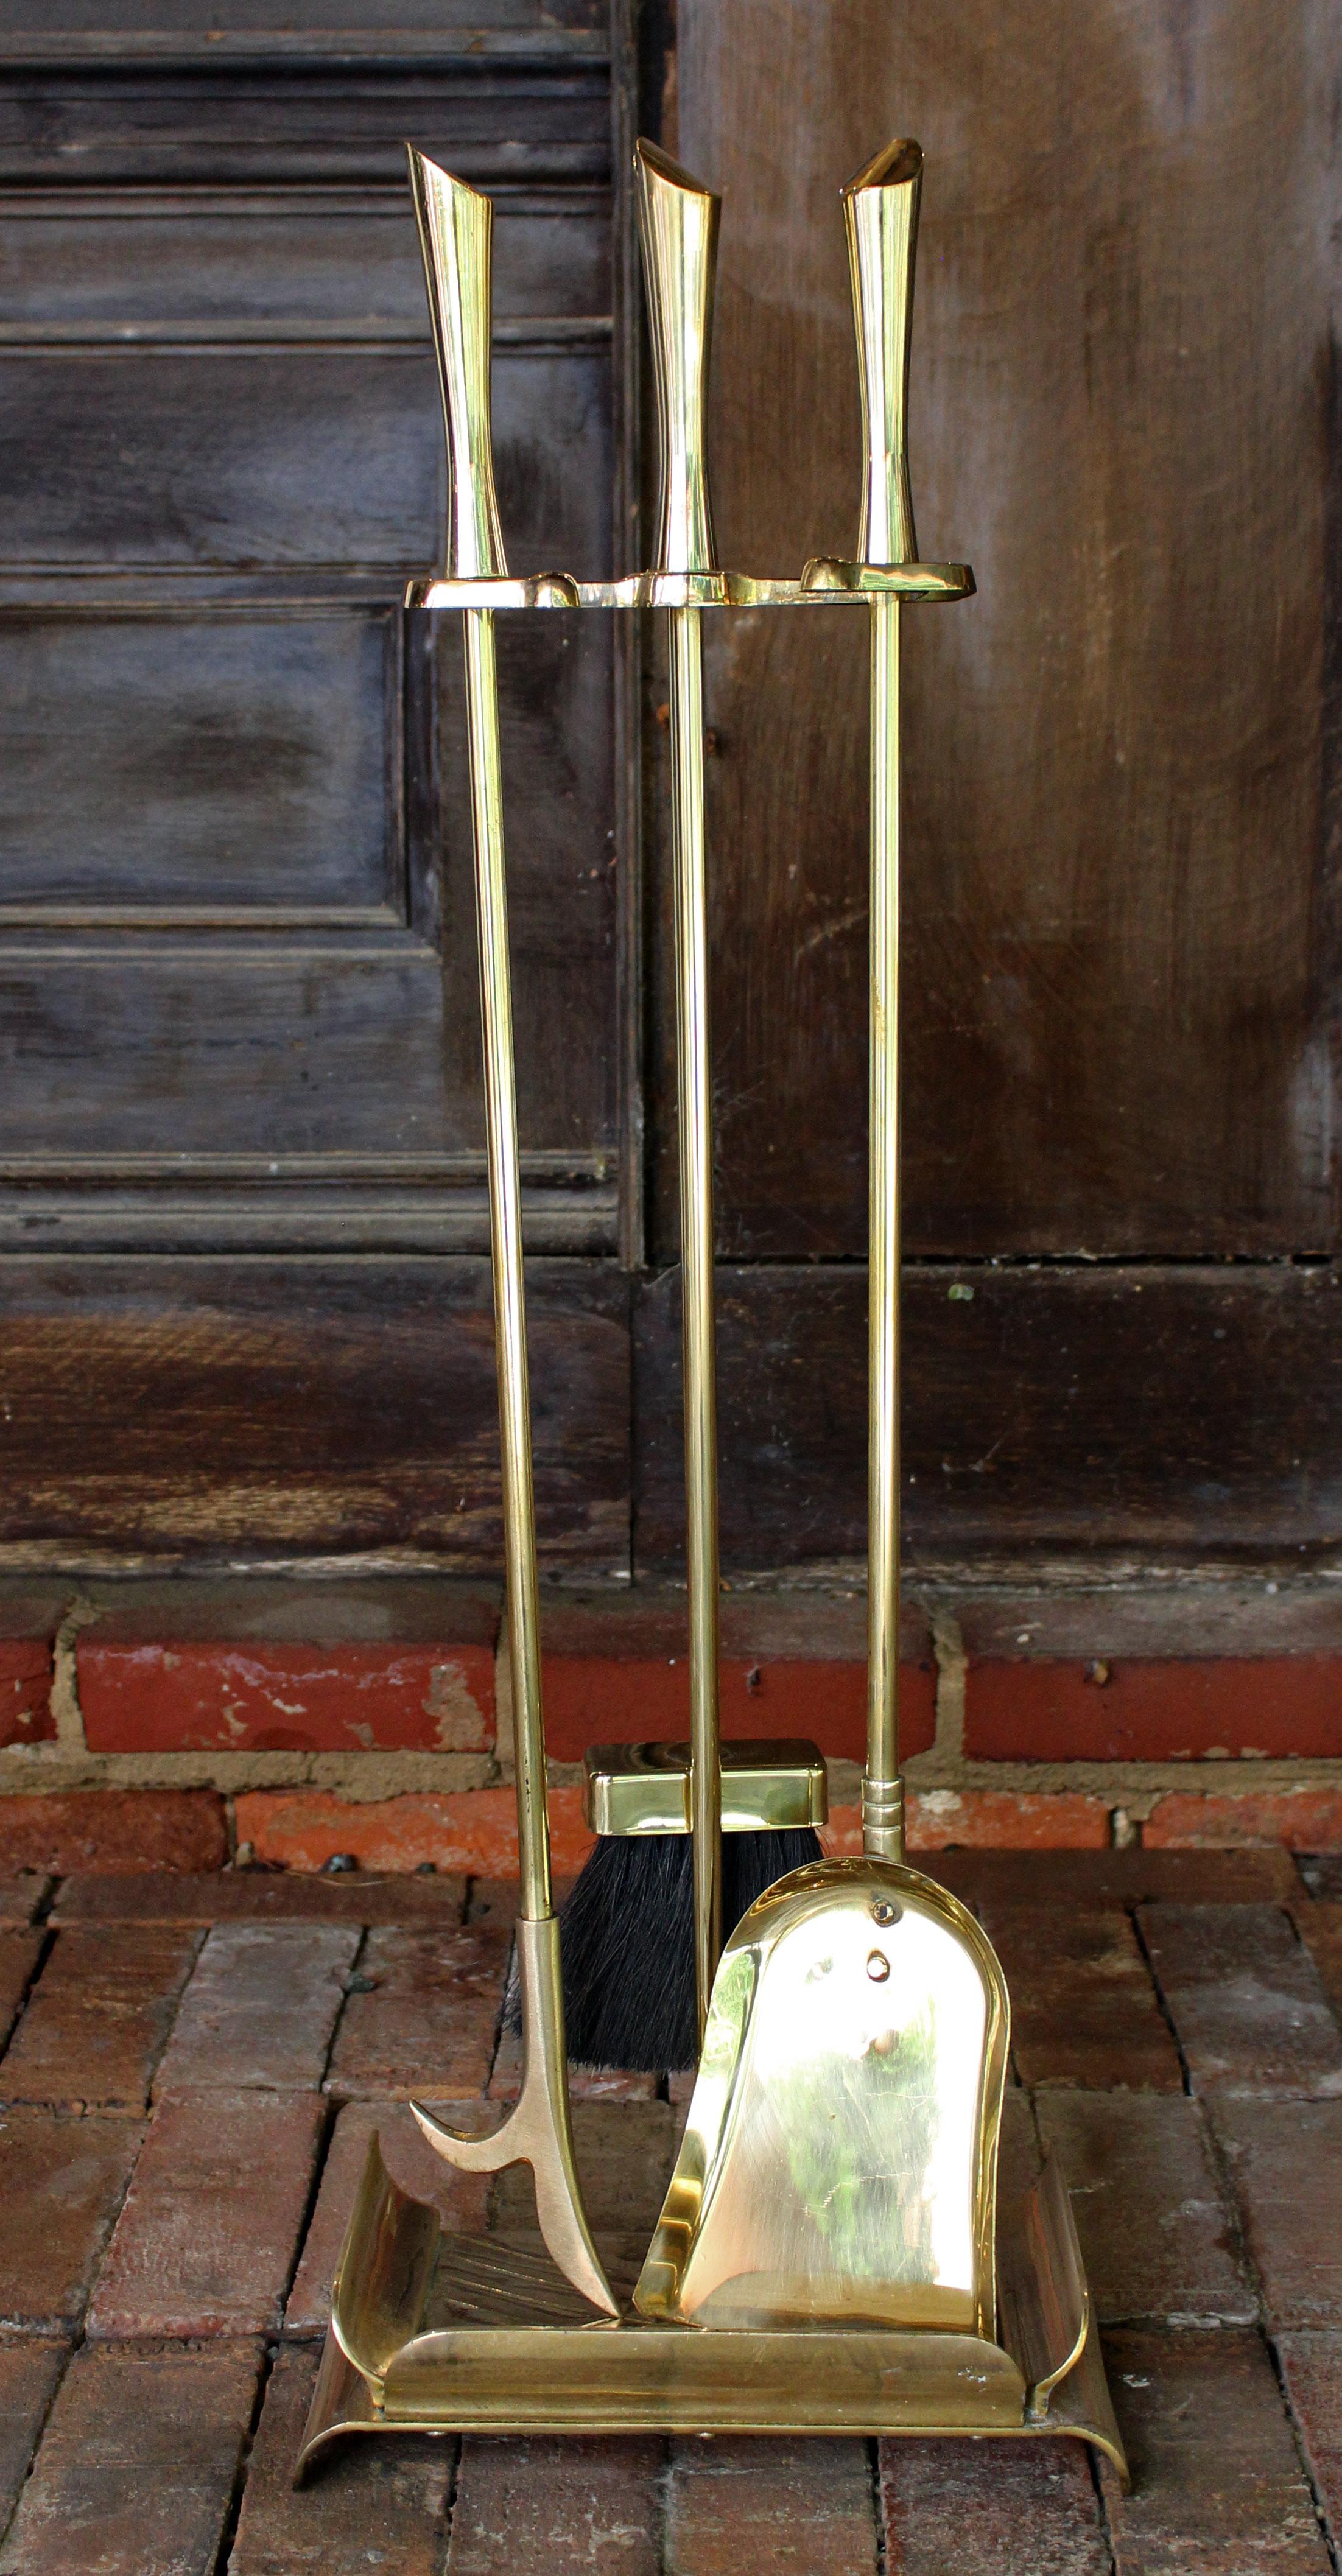 Circa 1950s brass fireplace set with original stand. Sculptural mid century modern set - shovel, poker & brush. Very heavy. Newly professionally polished. Stand: 31 1/2